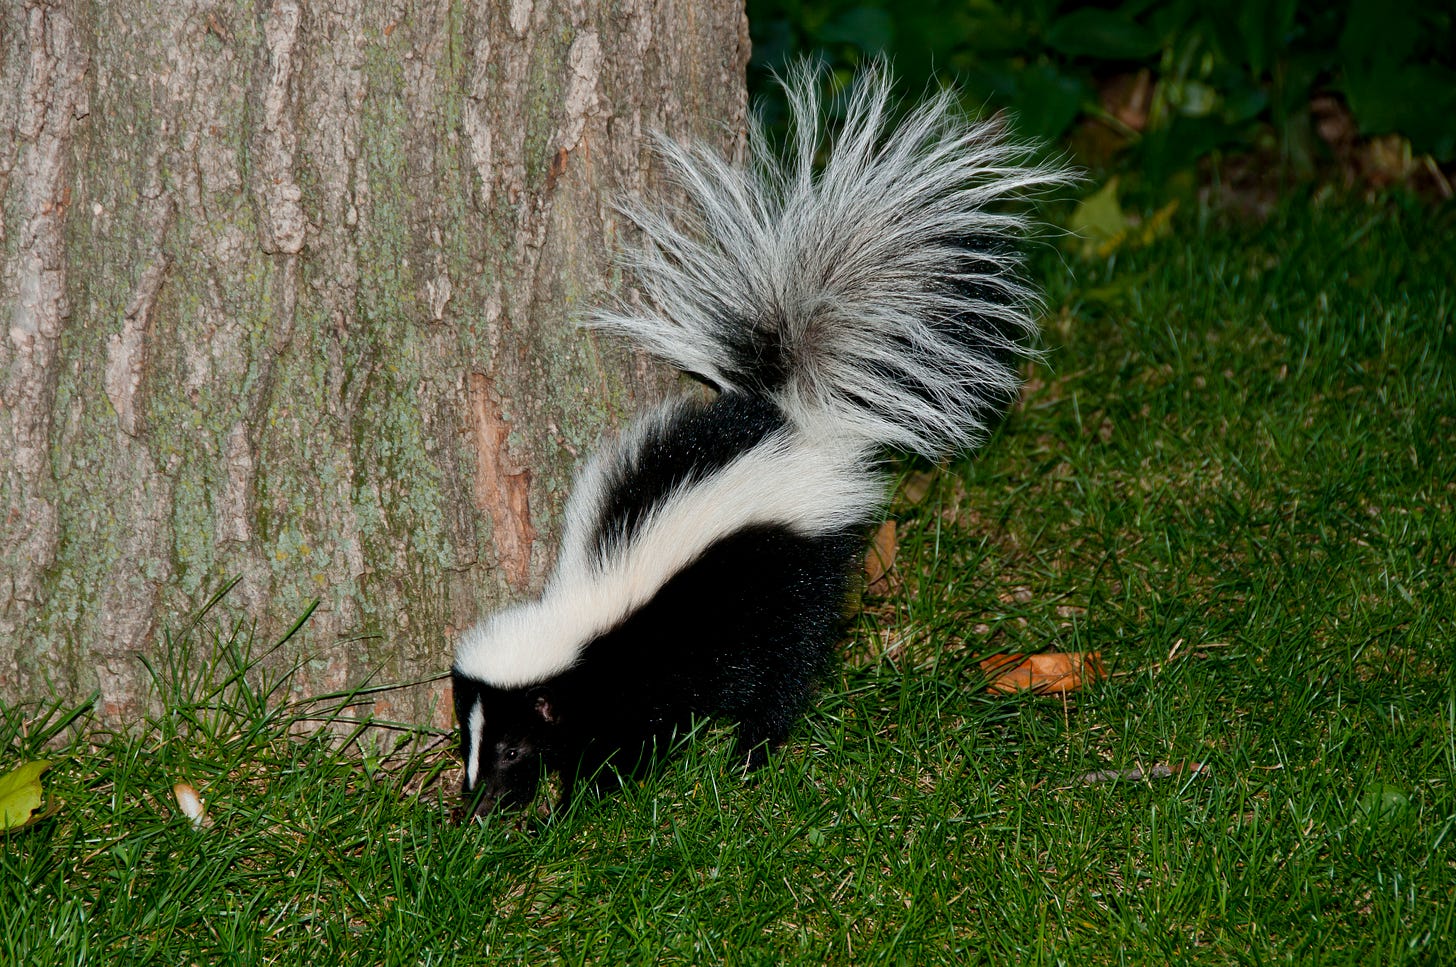 Black and white skunk by a tree trunk